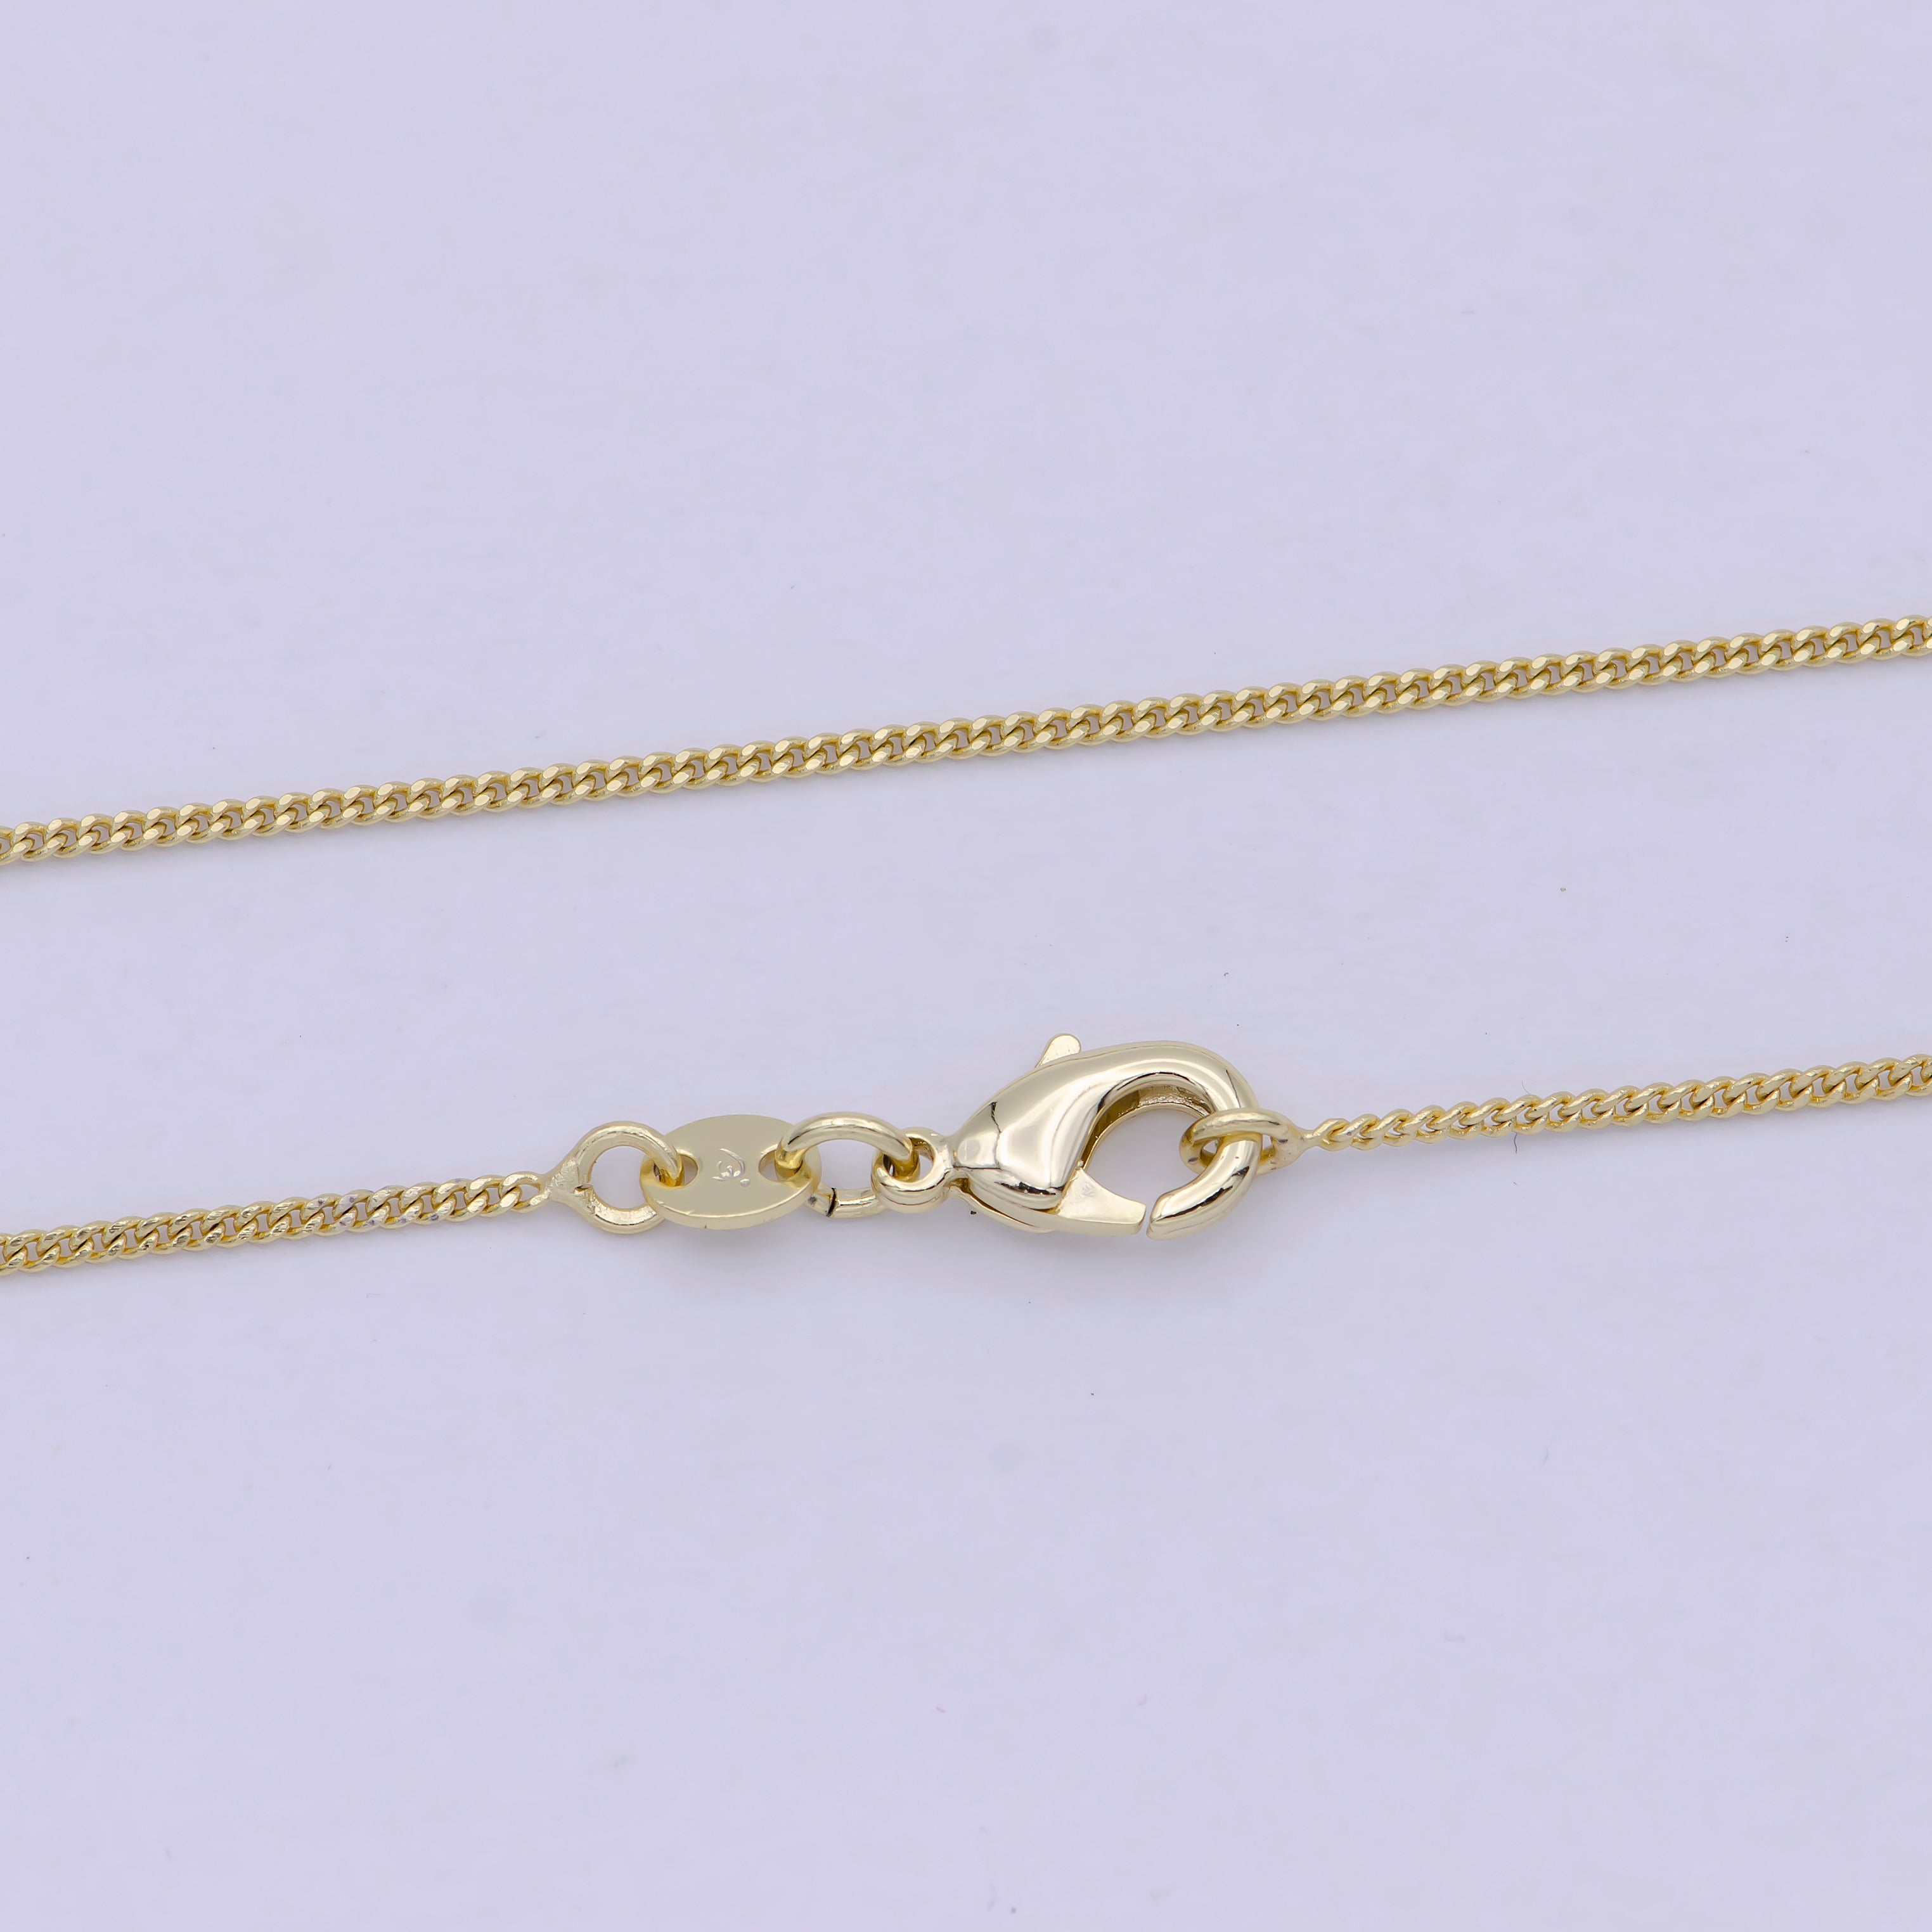 24K Gold Filled Curb Chain Necklace, 17.7 Inch Curb Chain Necklace, Dainty 1mm Link Necklace w/ Lobster Clasp | WA-811 - DLUXCA